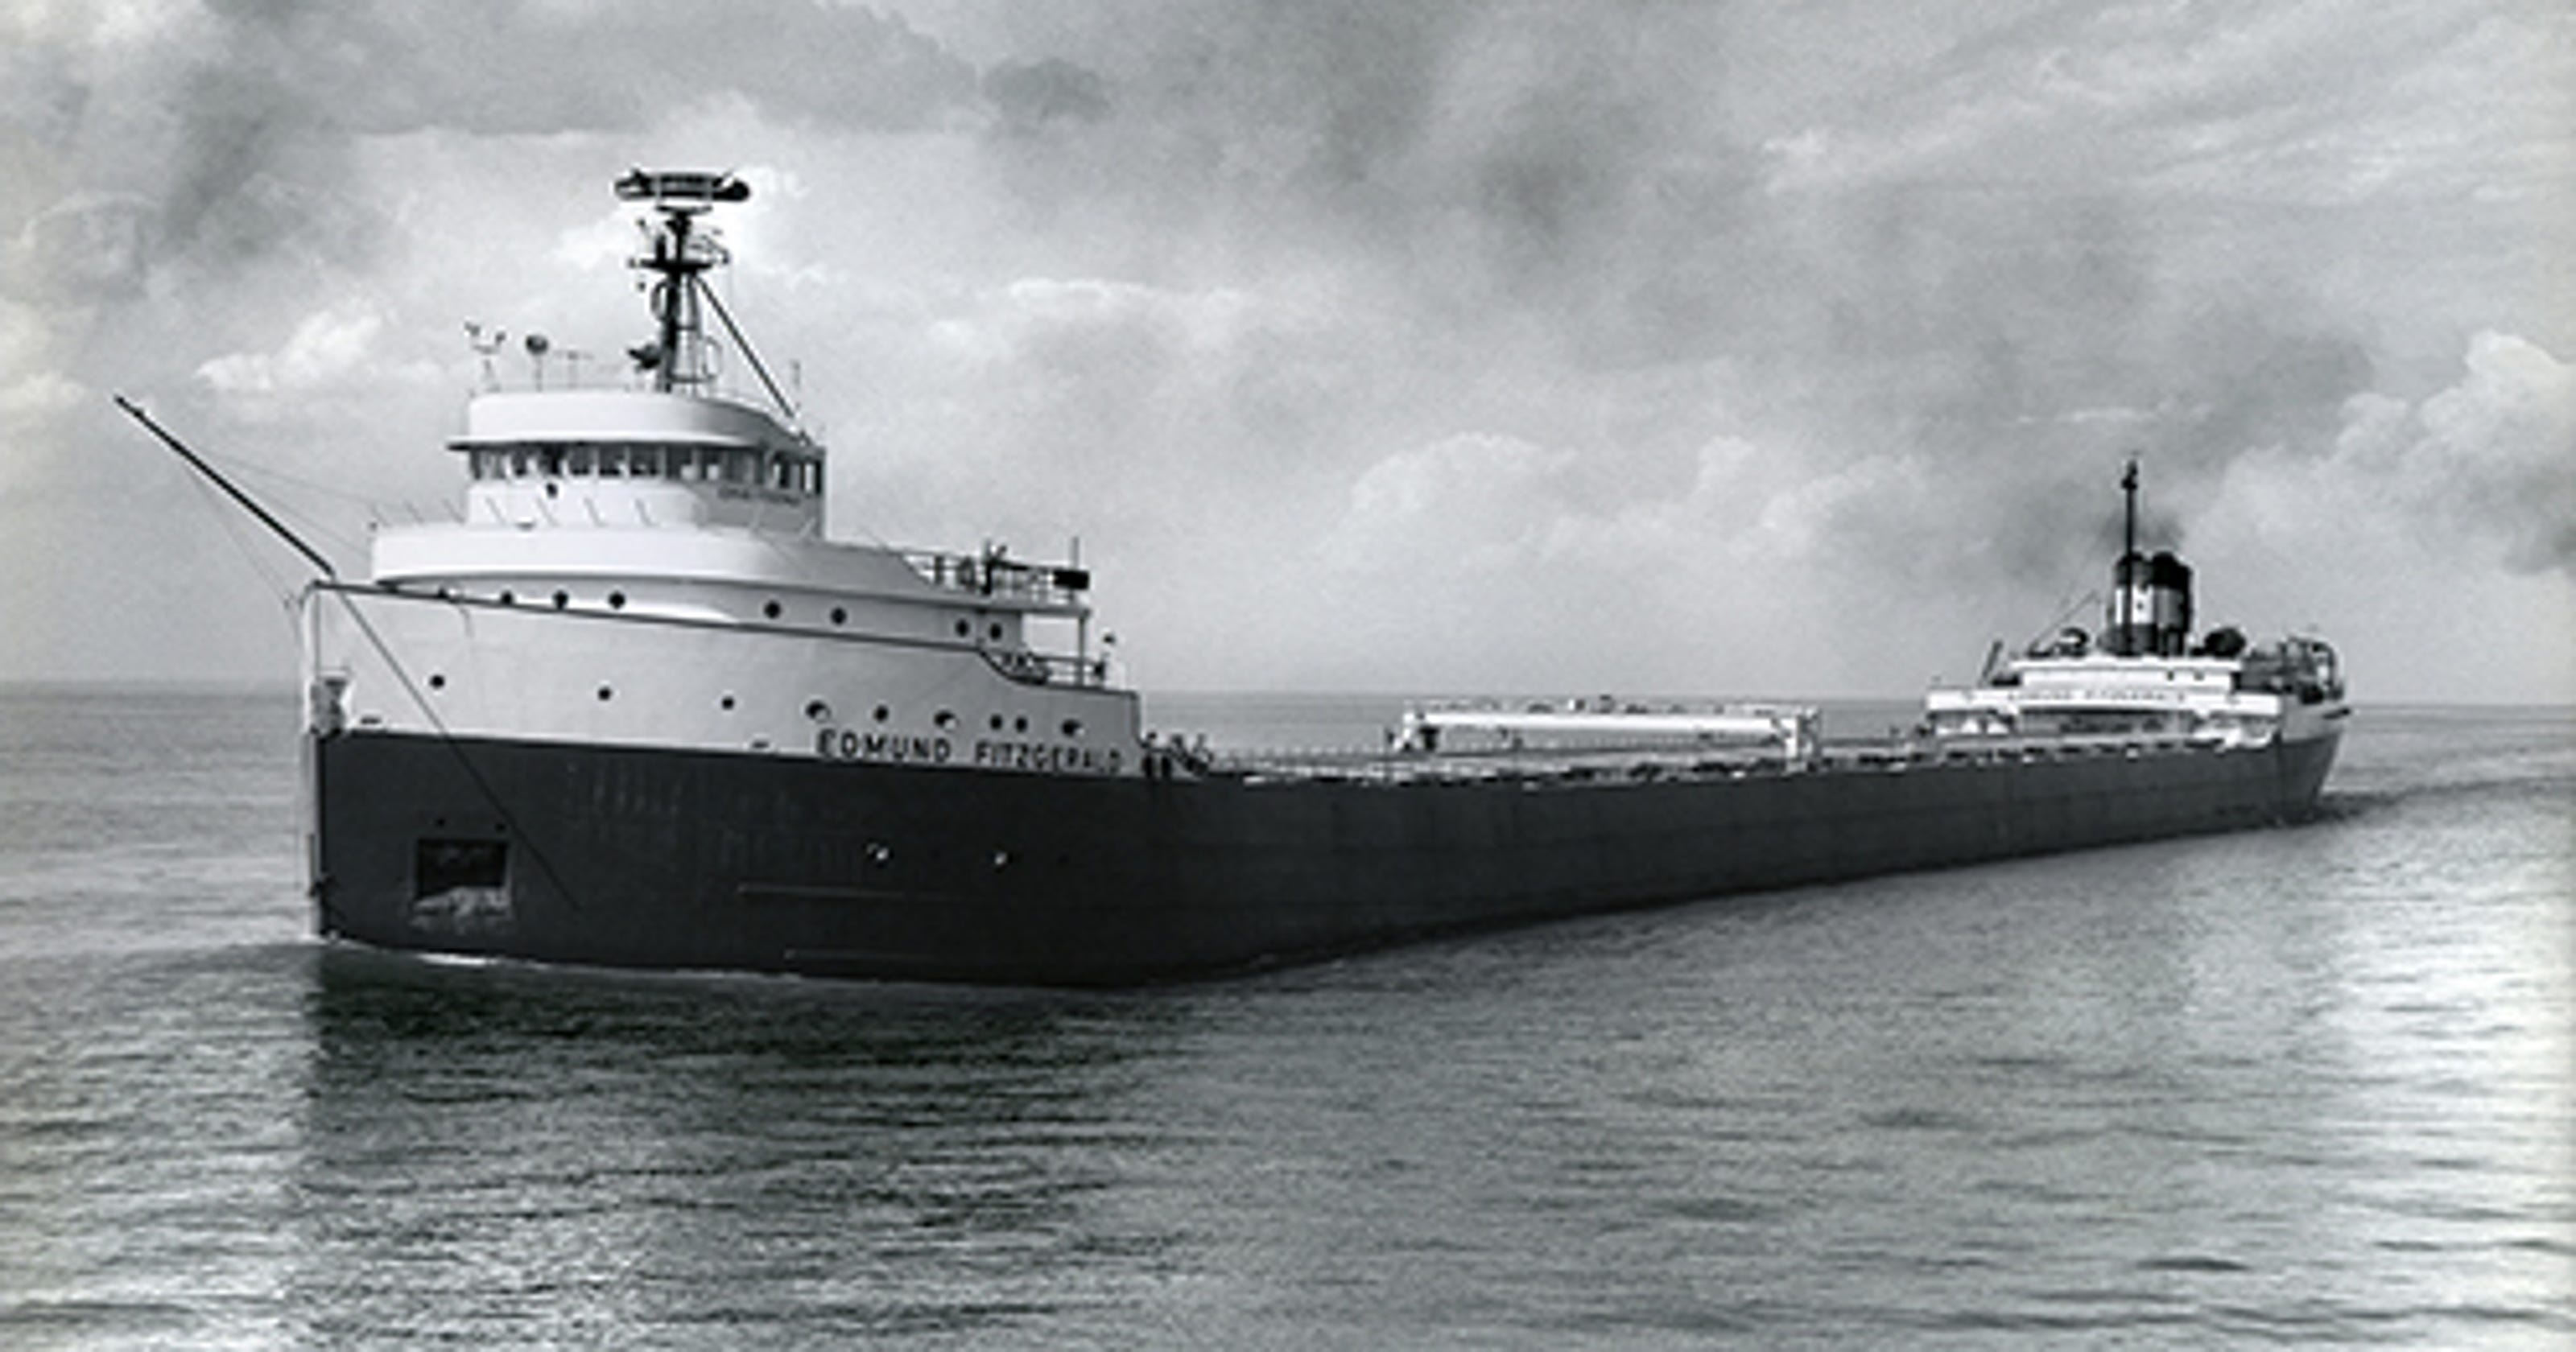 Events To Mark 40 Years Since Edmund Fitzgerald Sank